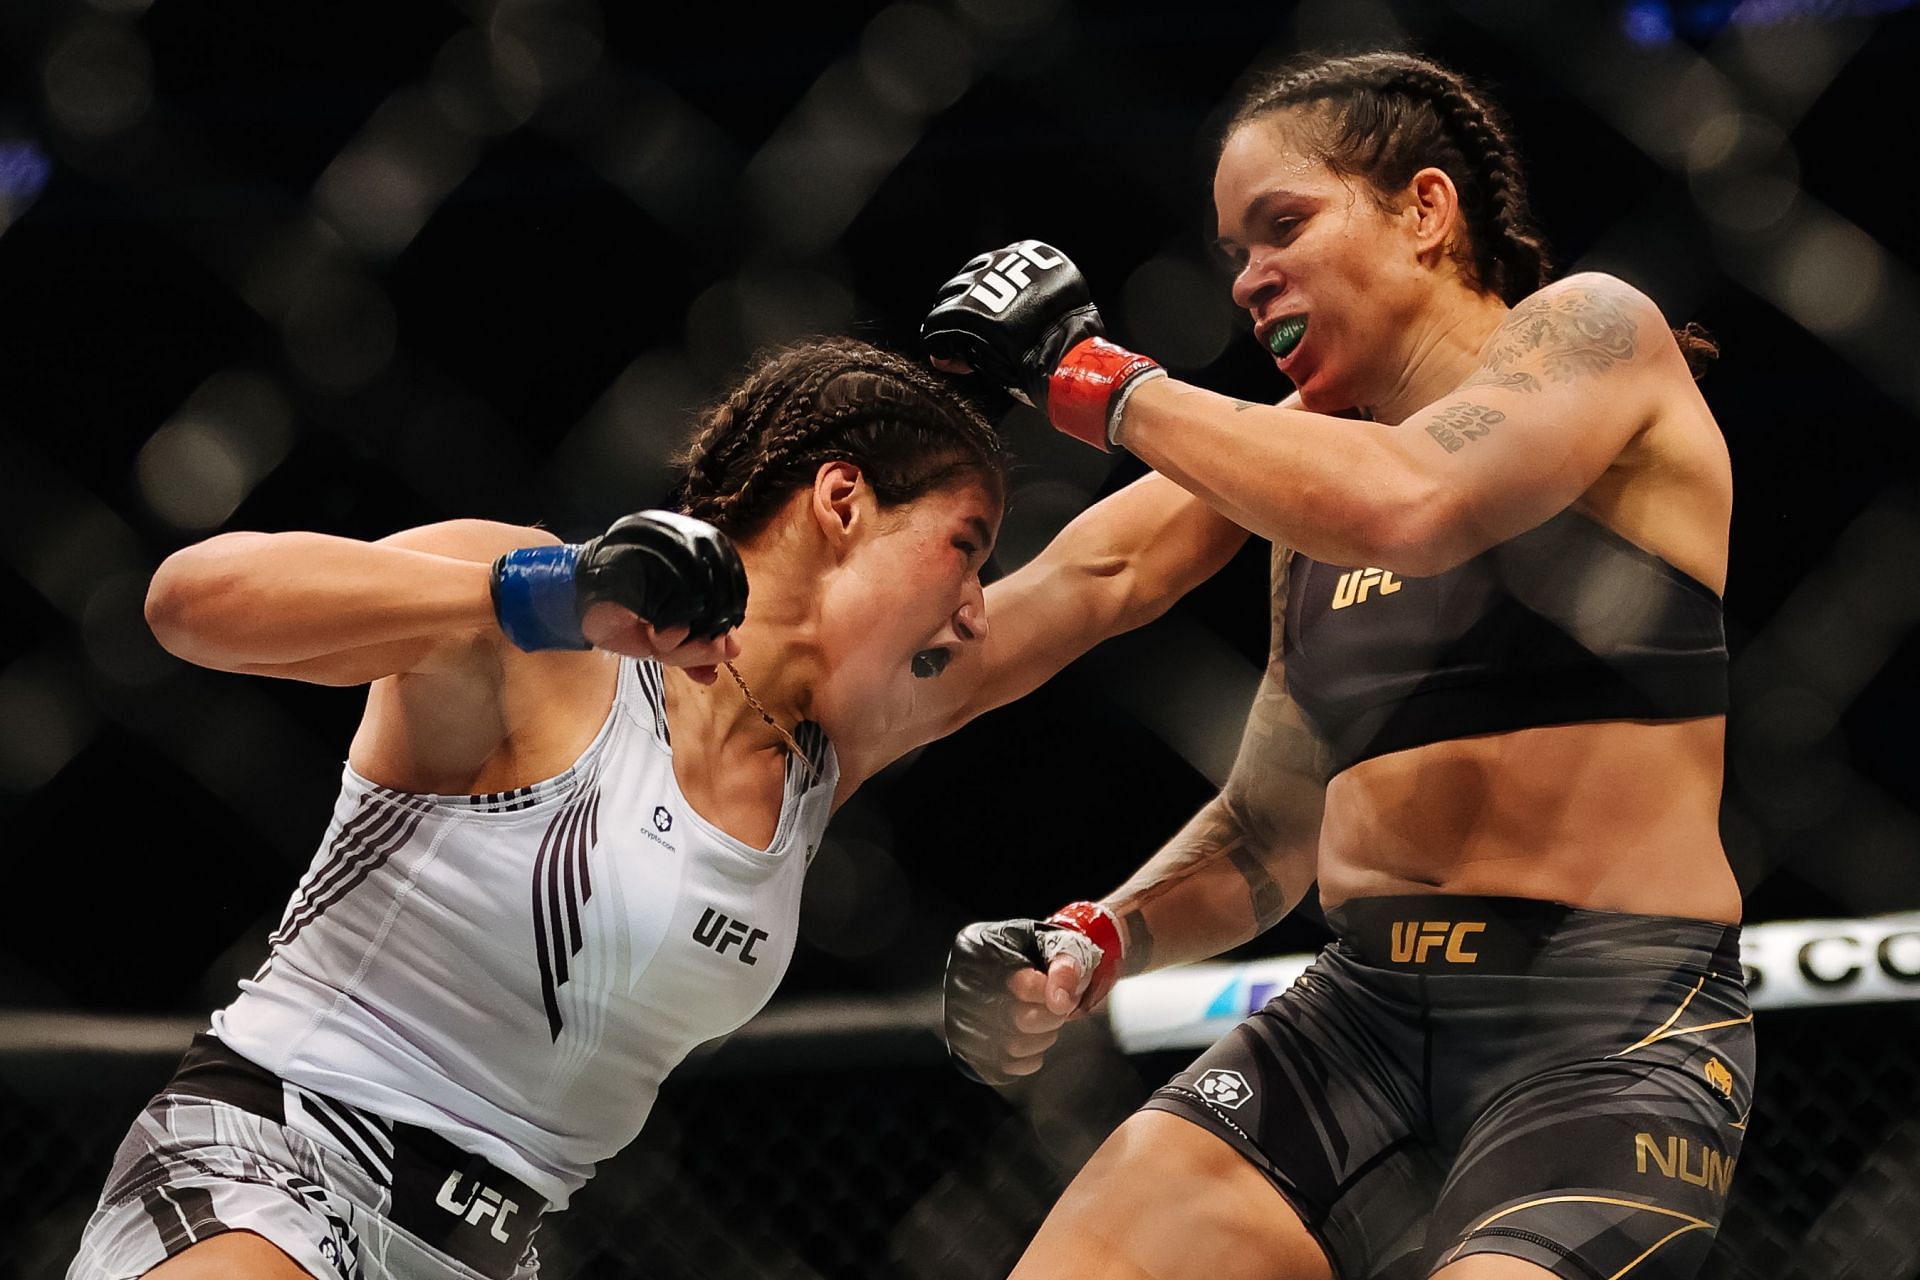 Amanda Nunes gave no excuses for her loss to Julianna Pena in the immediate aftermath